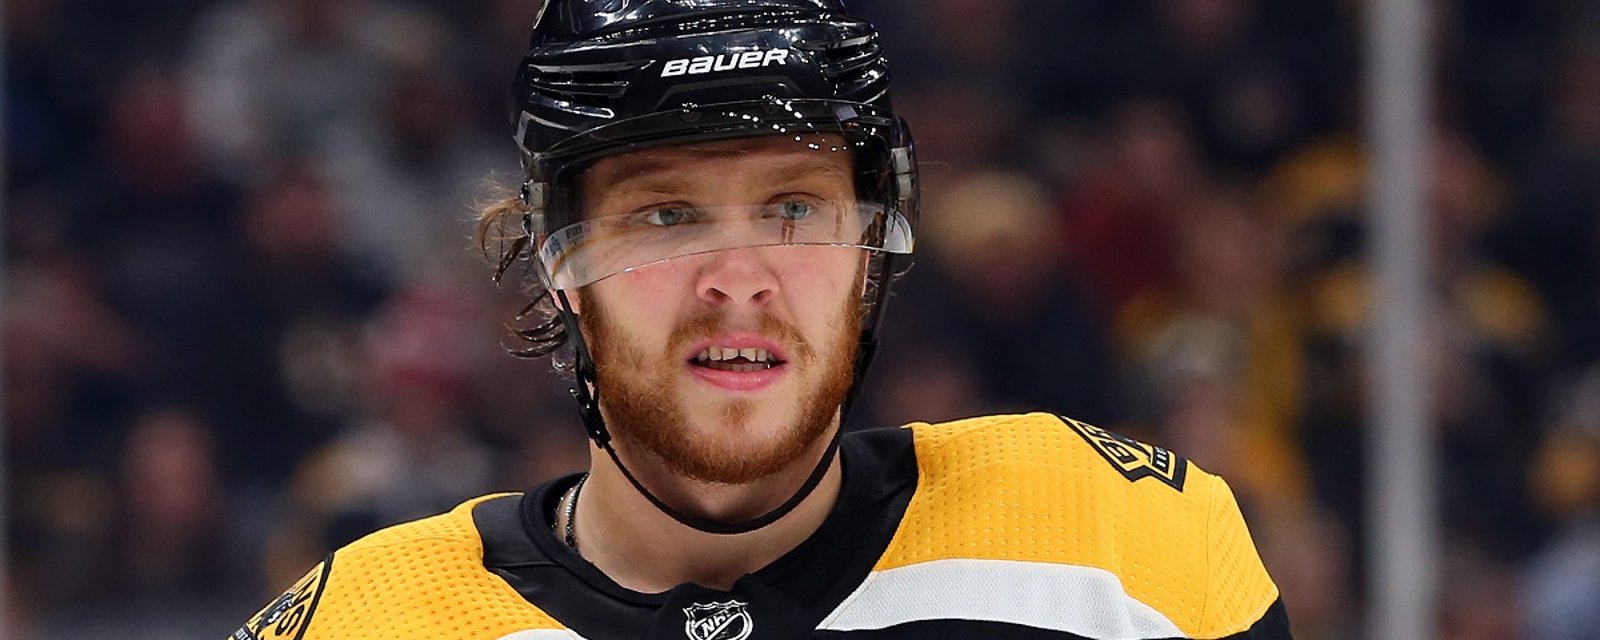 Pastrnak says there's “no question” as to who should win the Hart this year.